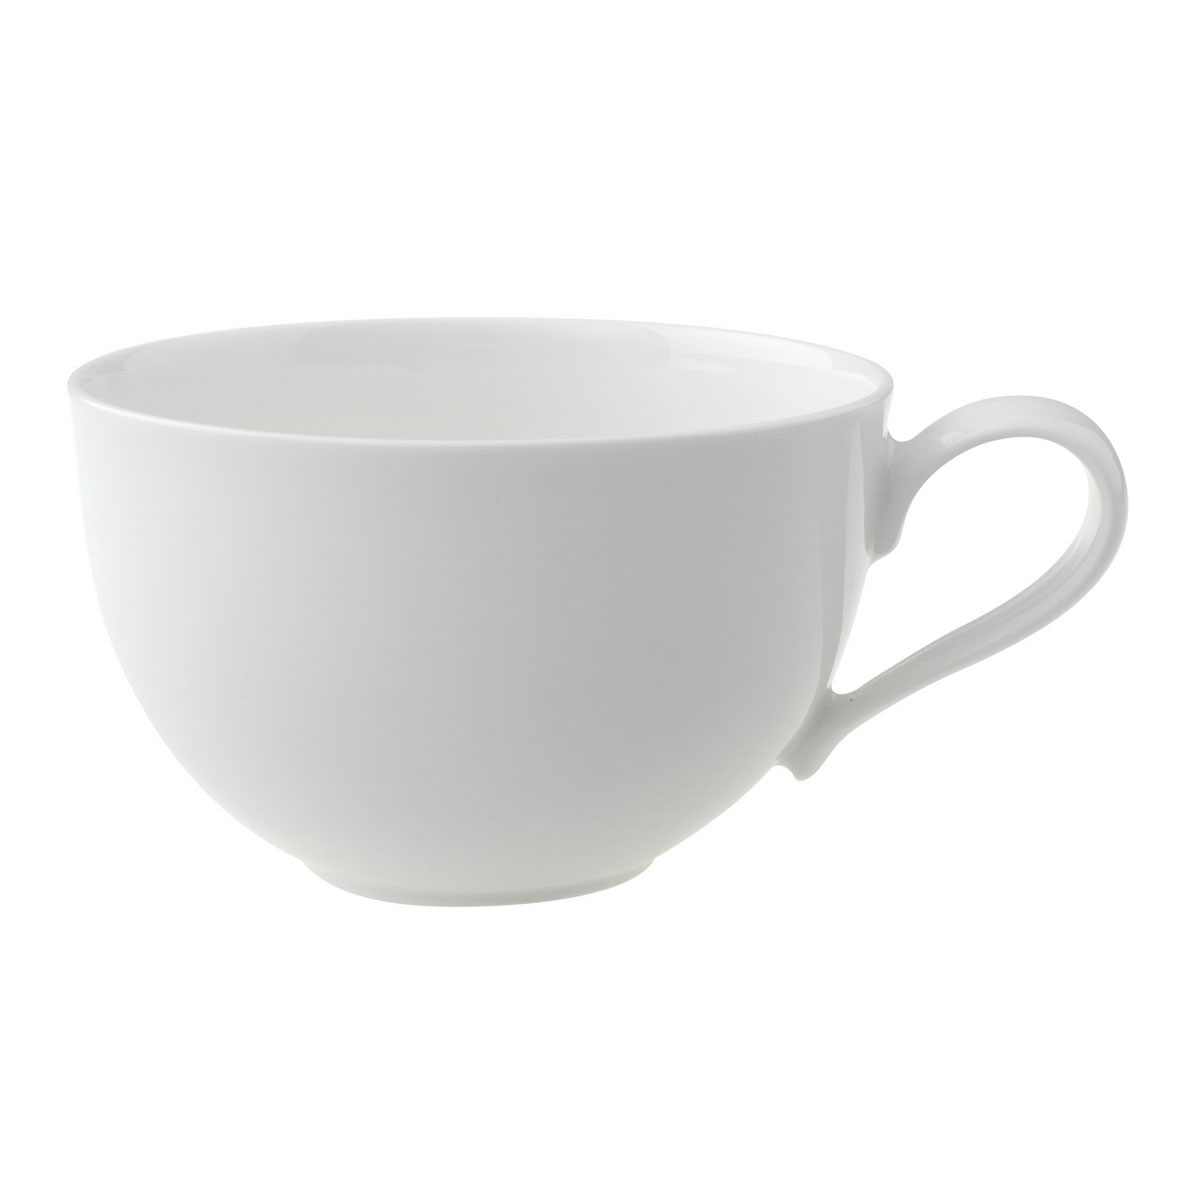 Villeroy and Boch New Cottage Basic Breakfast Cup